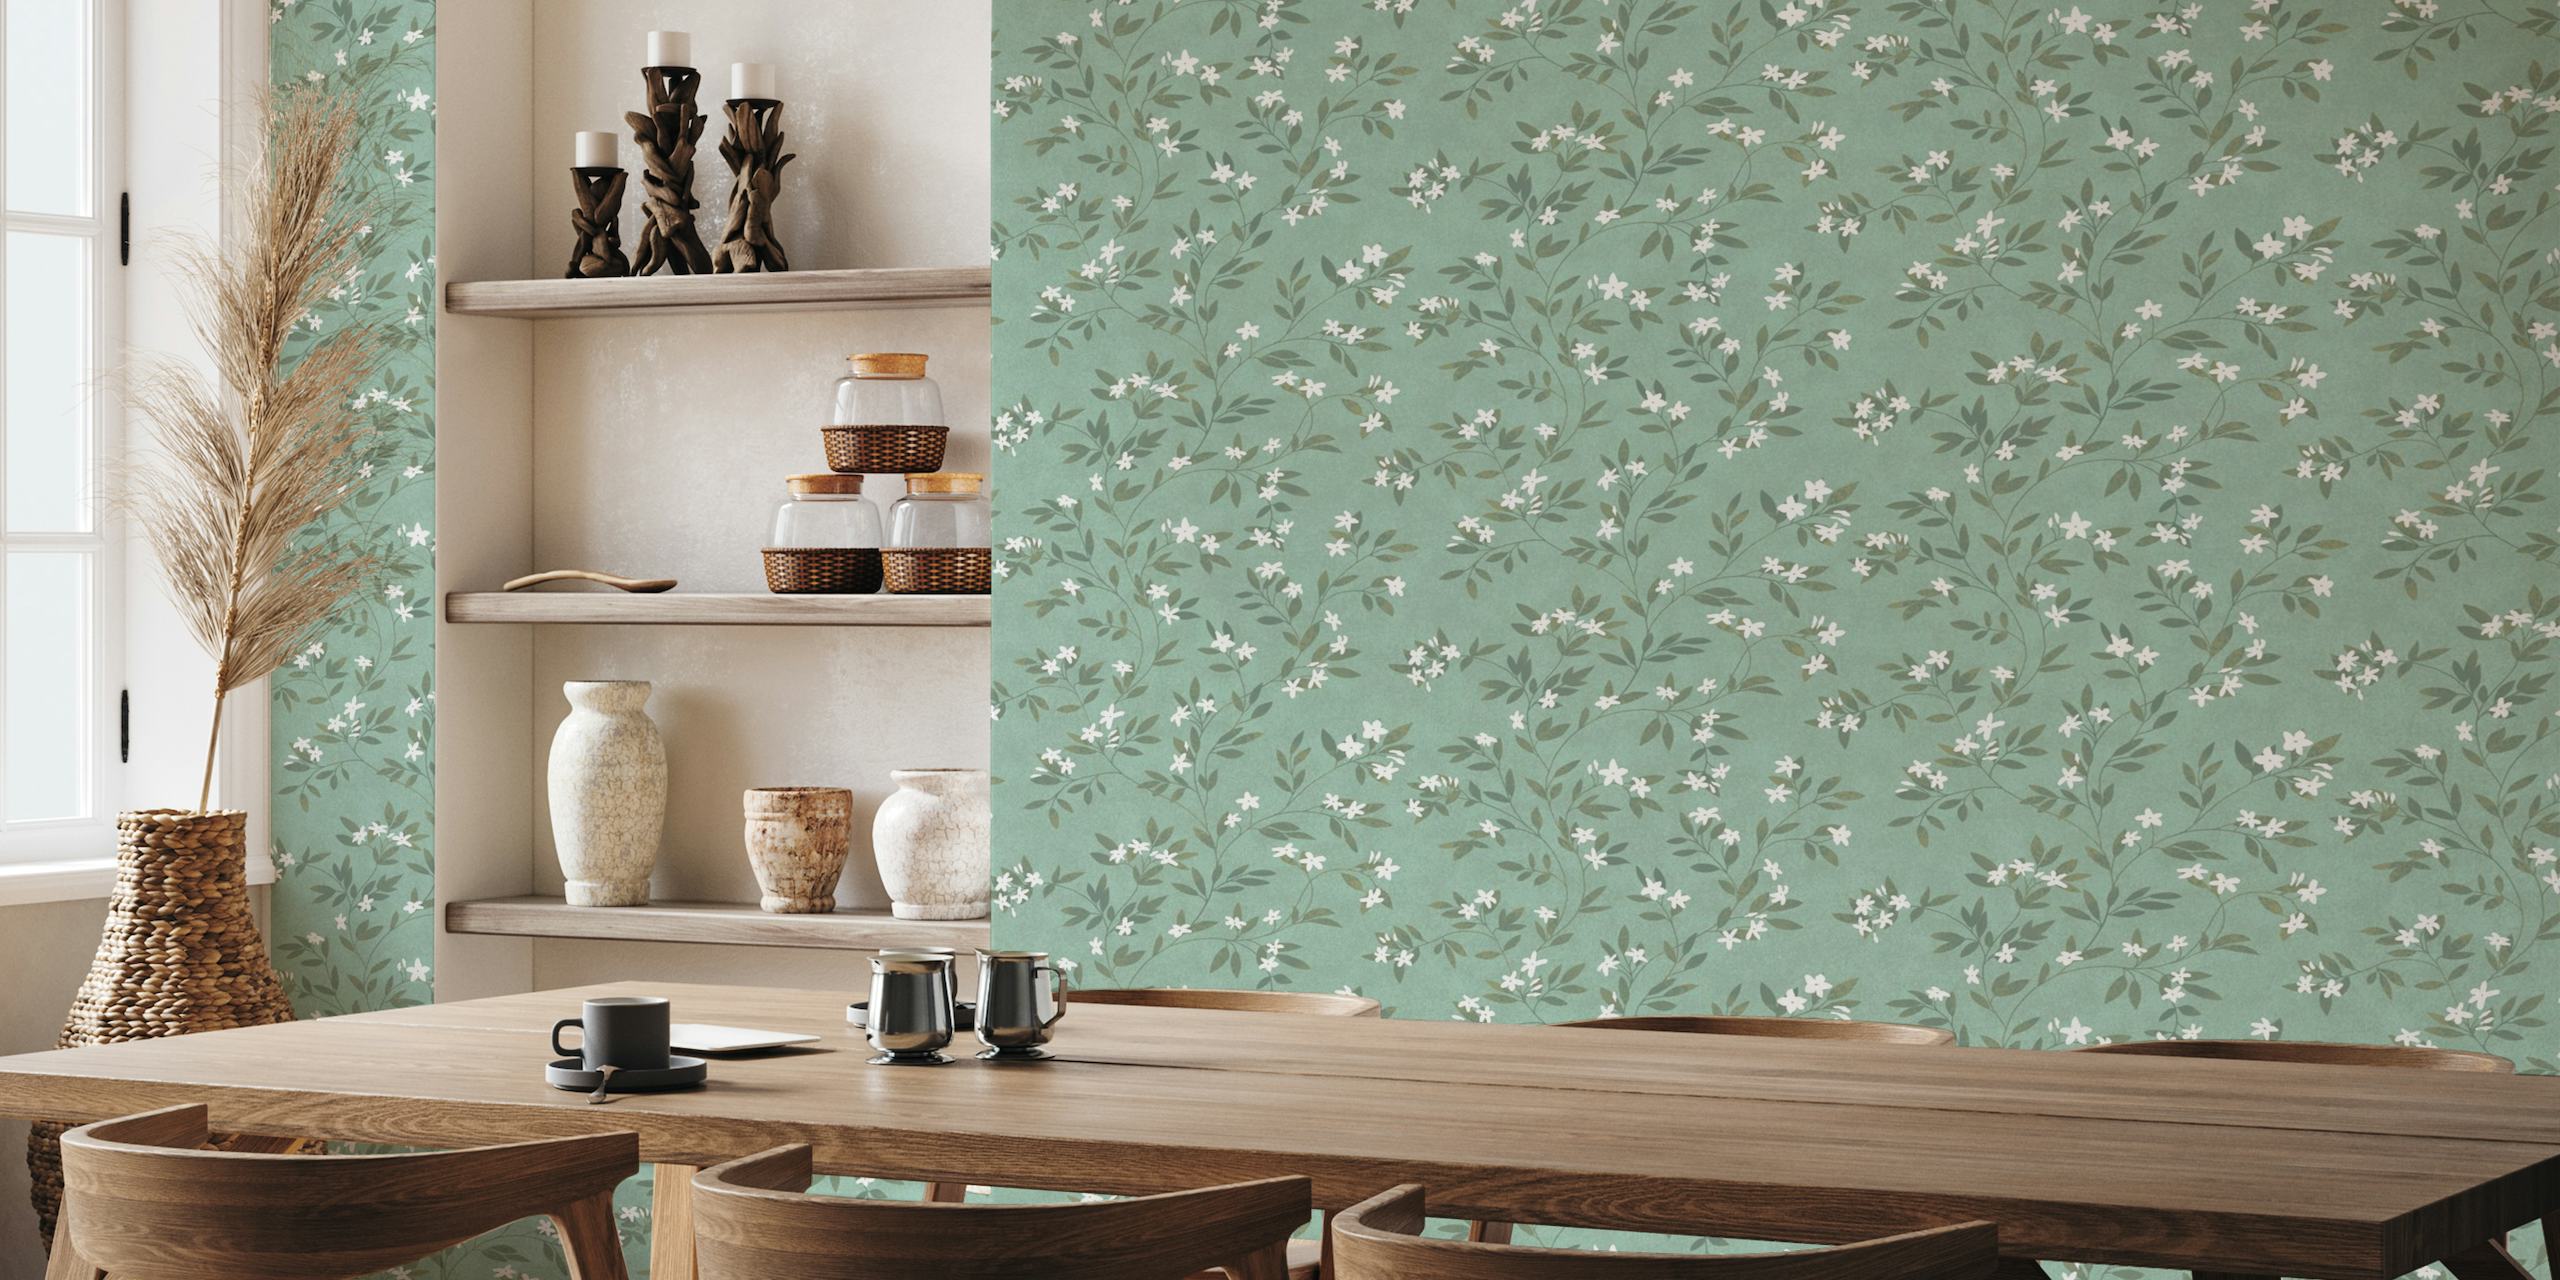 Sage green wall mural with white jasmine flowers and foliage pattern